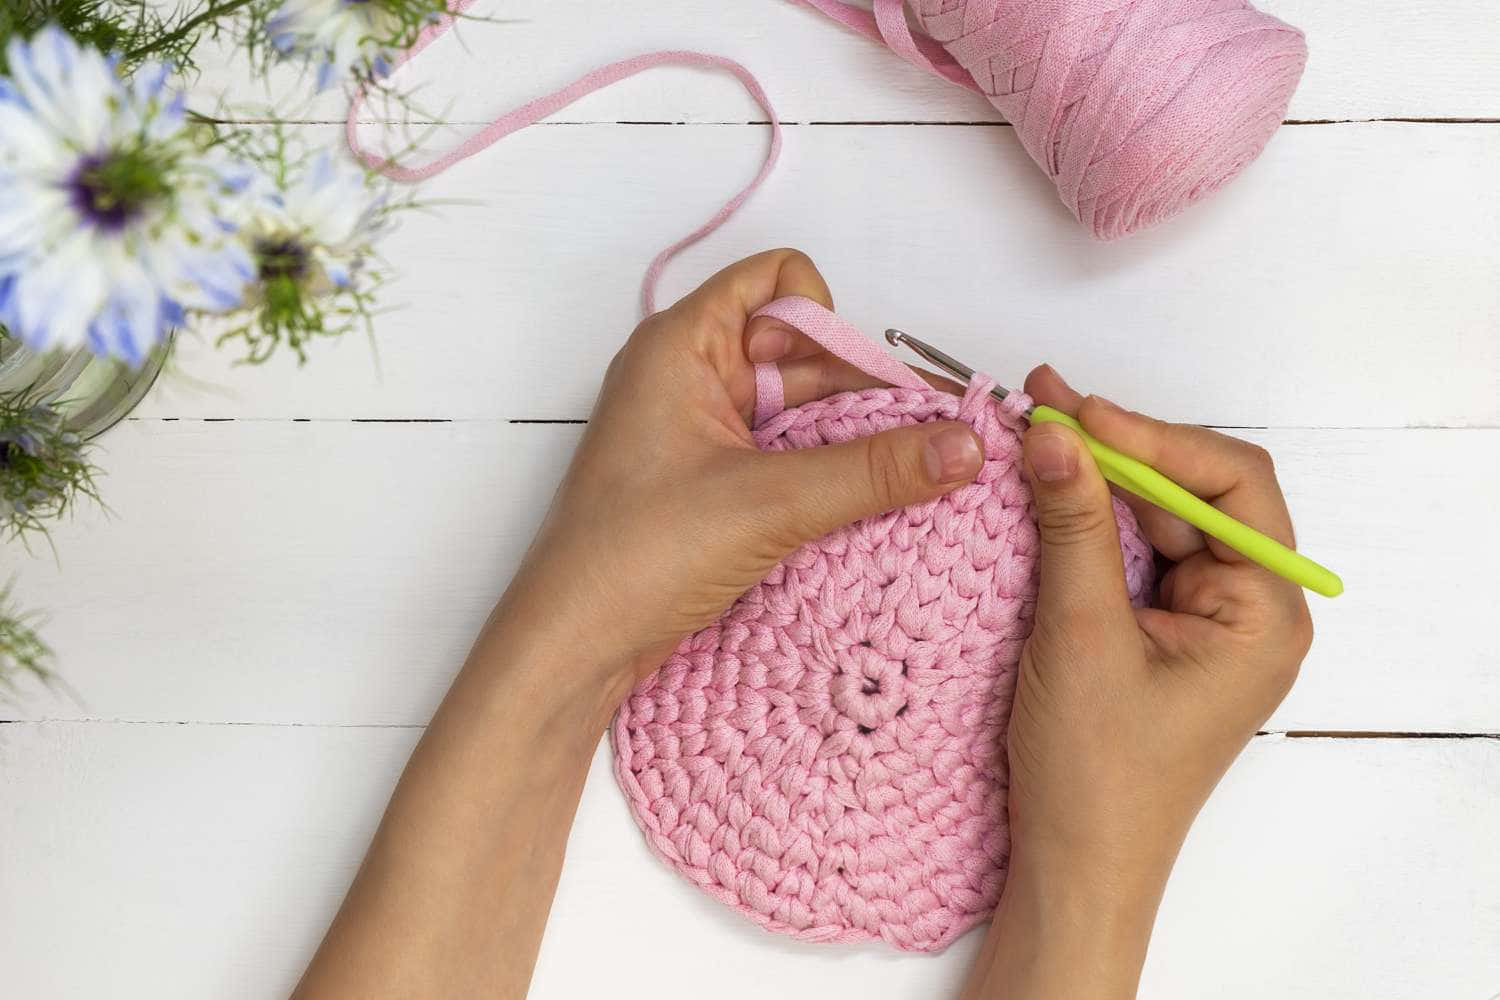 A Person Is Crocheting A Pink Crocheted Bag